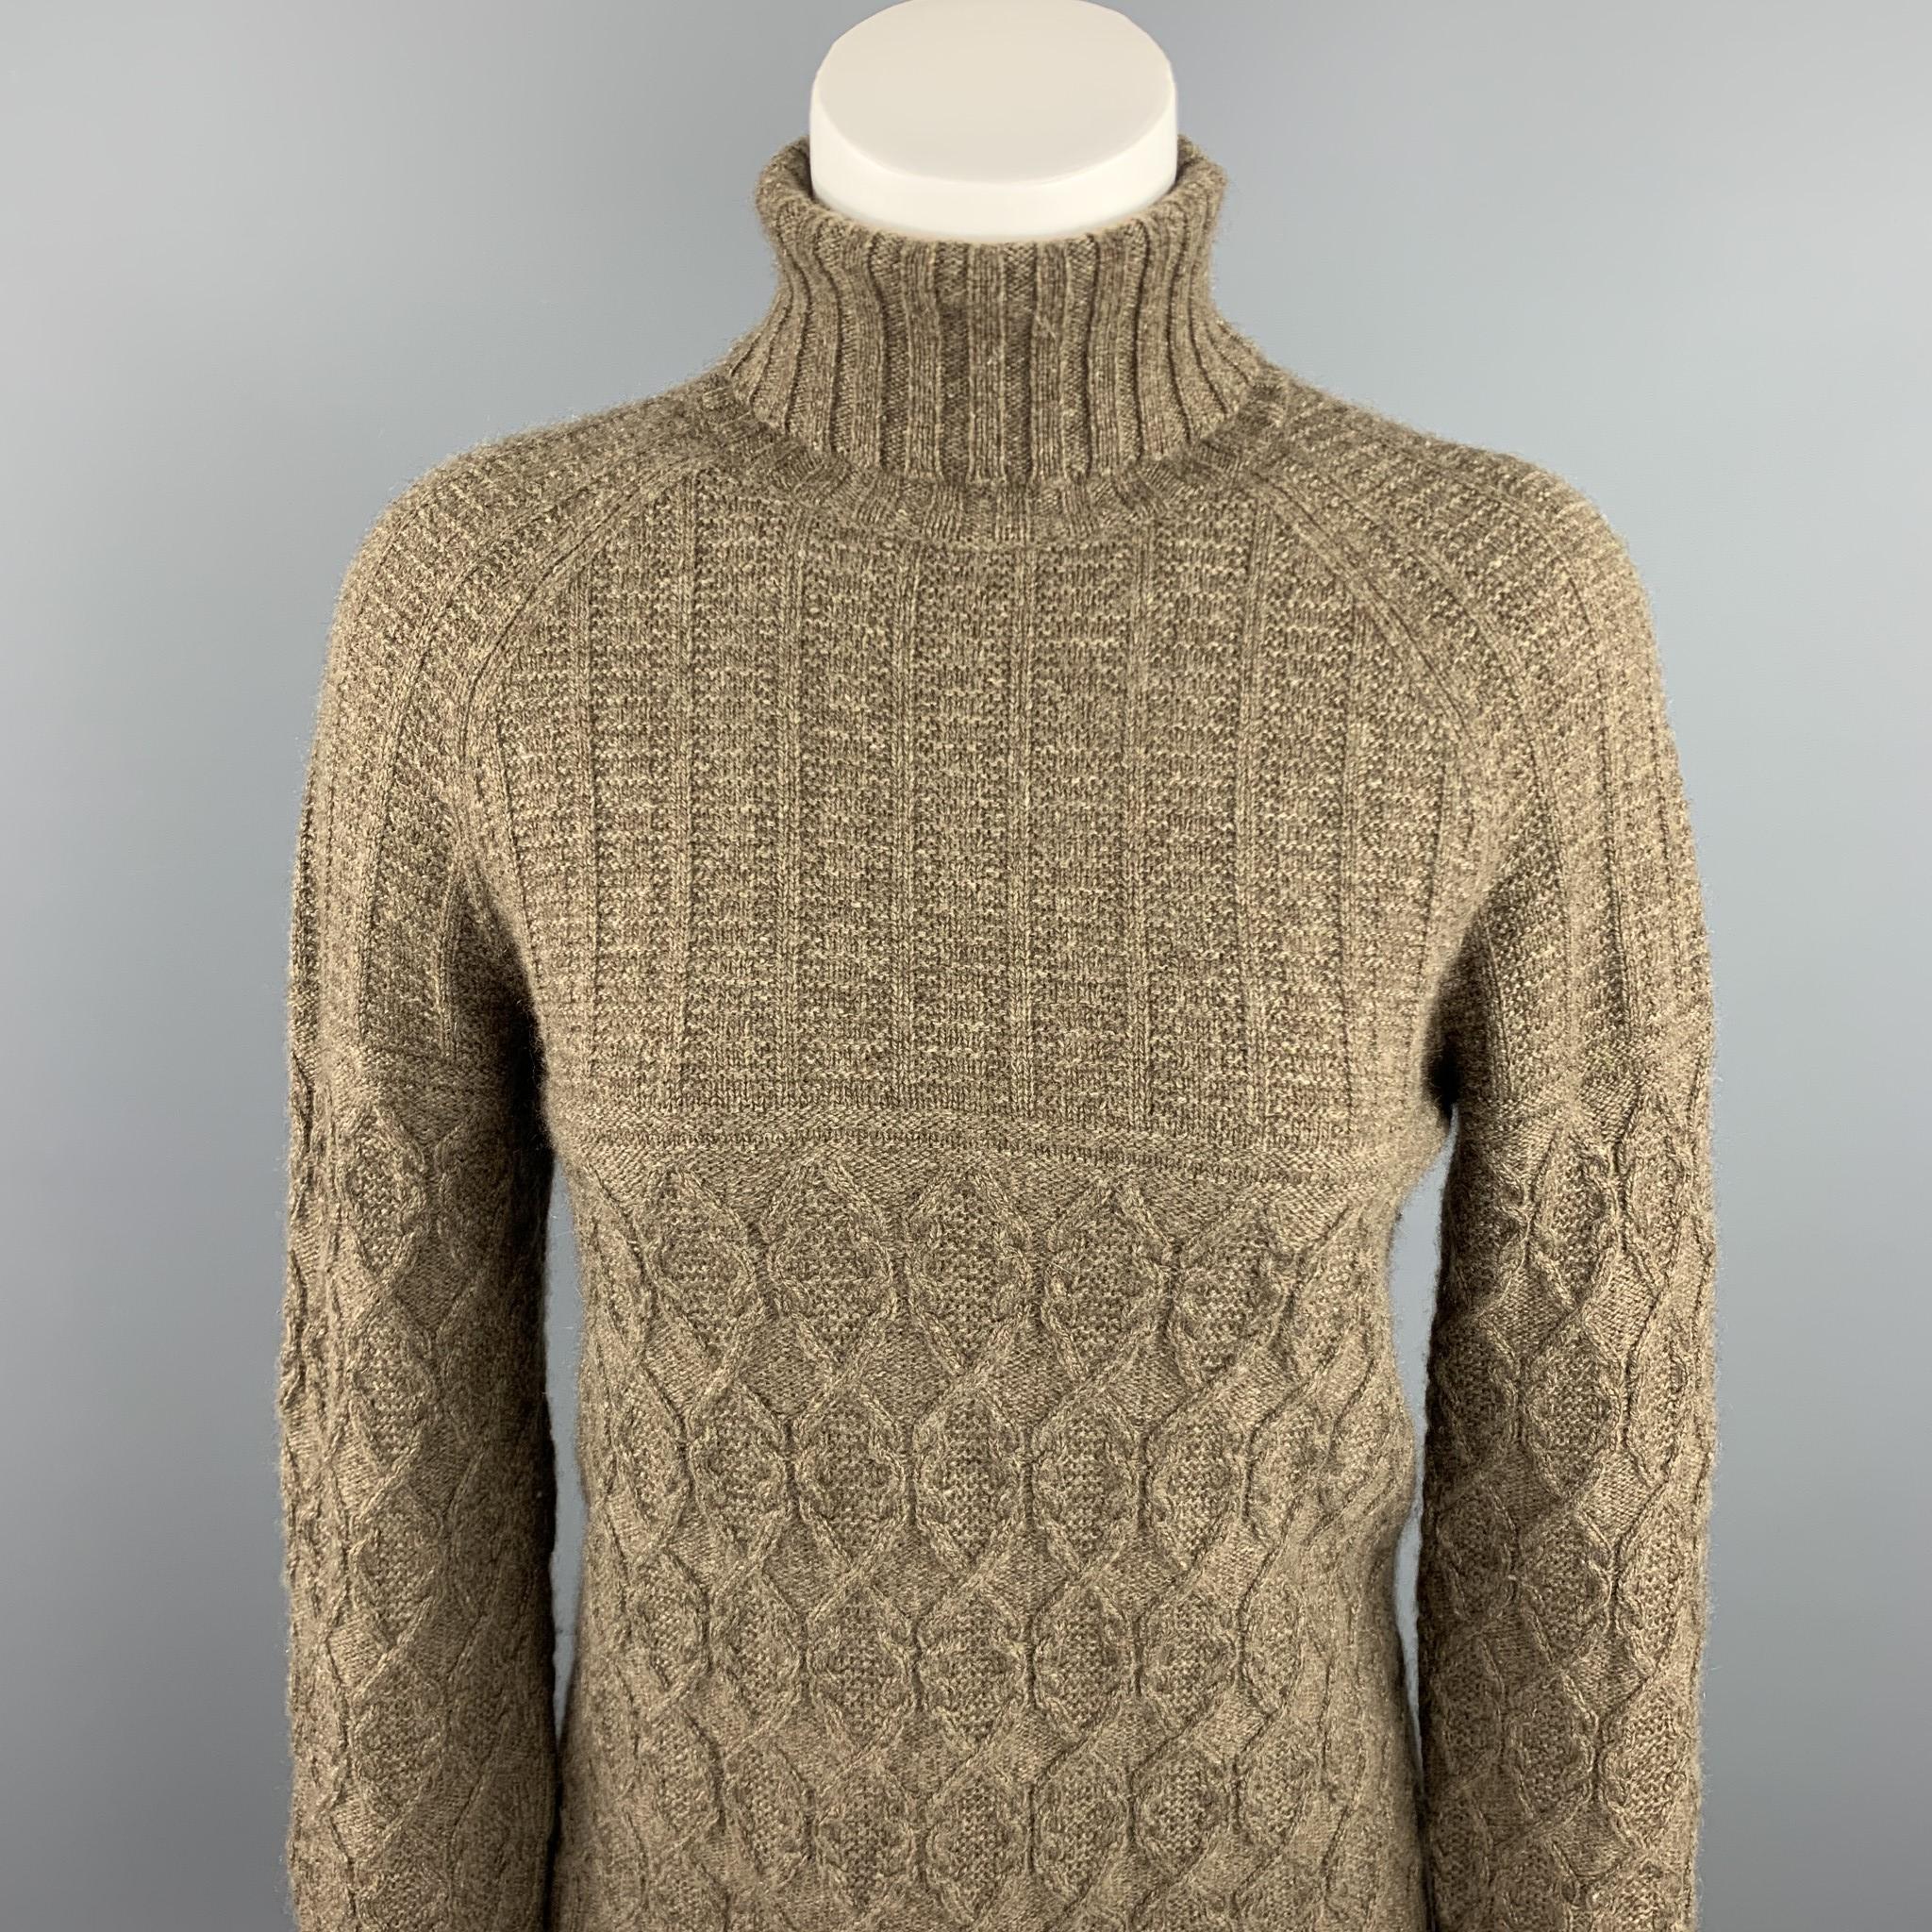 RALPH LAUREN COLLECTION pullover comes in a taupe knitted cashmere featuring a turtleneck style. Made in Italy.

Excellent Pre-Owned Condition.
Marked: S

Measurements:

Shoulder: 16 in. 
Bust: 34 in. 
Sleeve: 26 in. 
Length: 23 in.